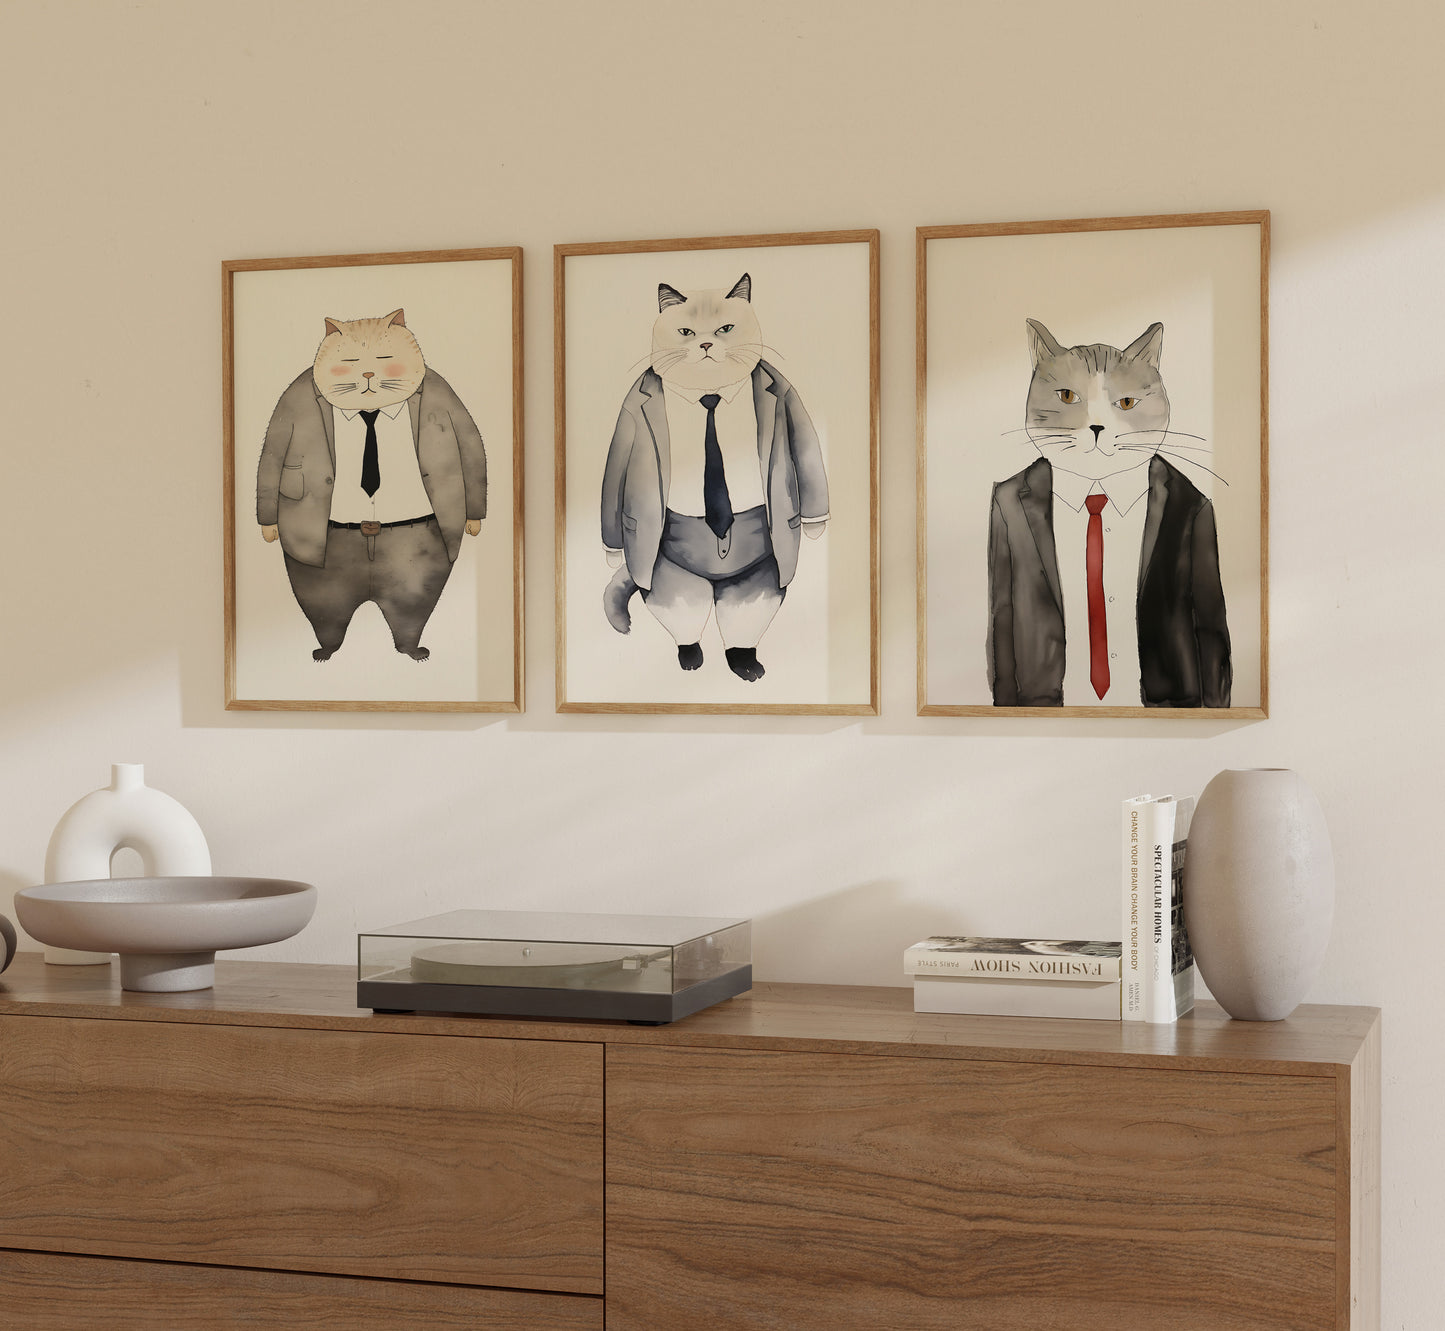 Three framed illustrations of cats dressed in business attire hanging on a wall above a sideboard.